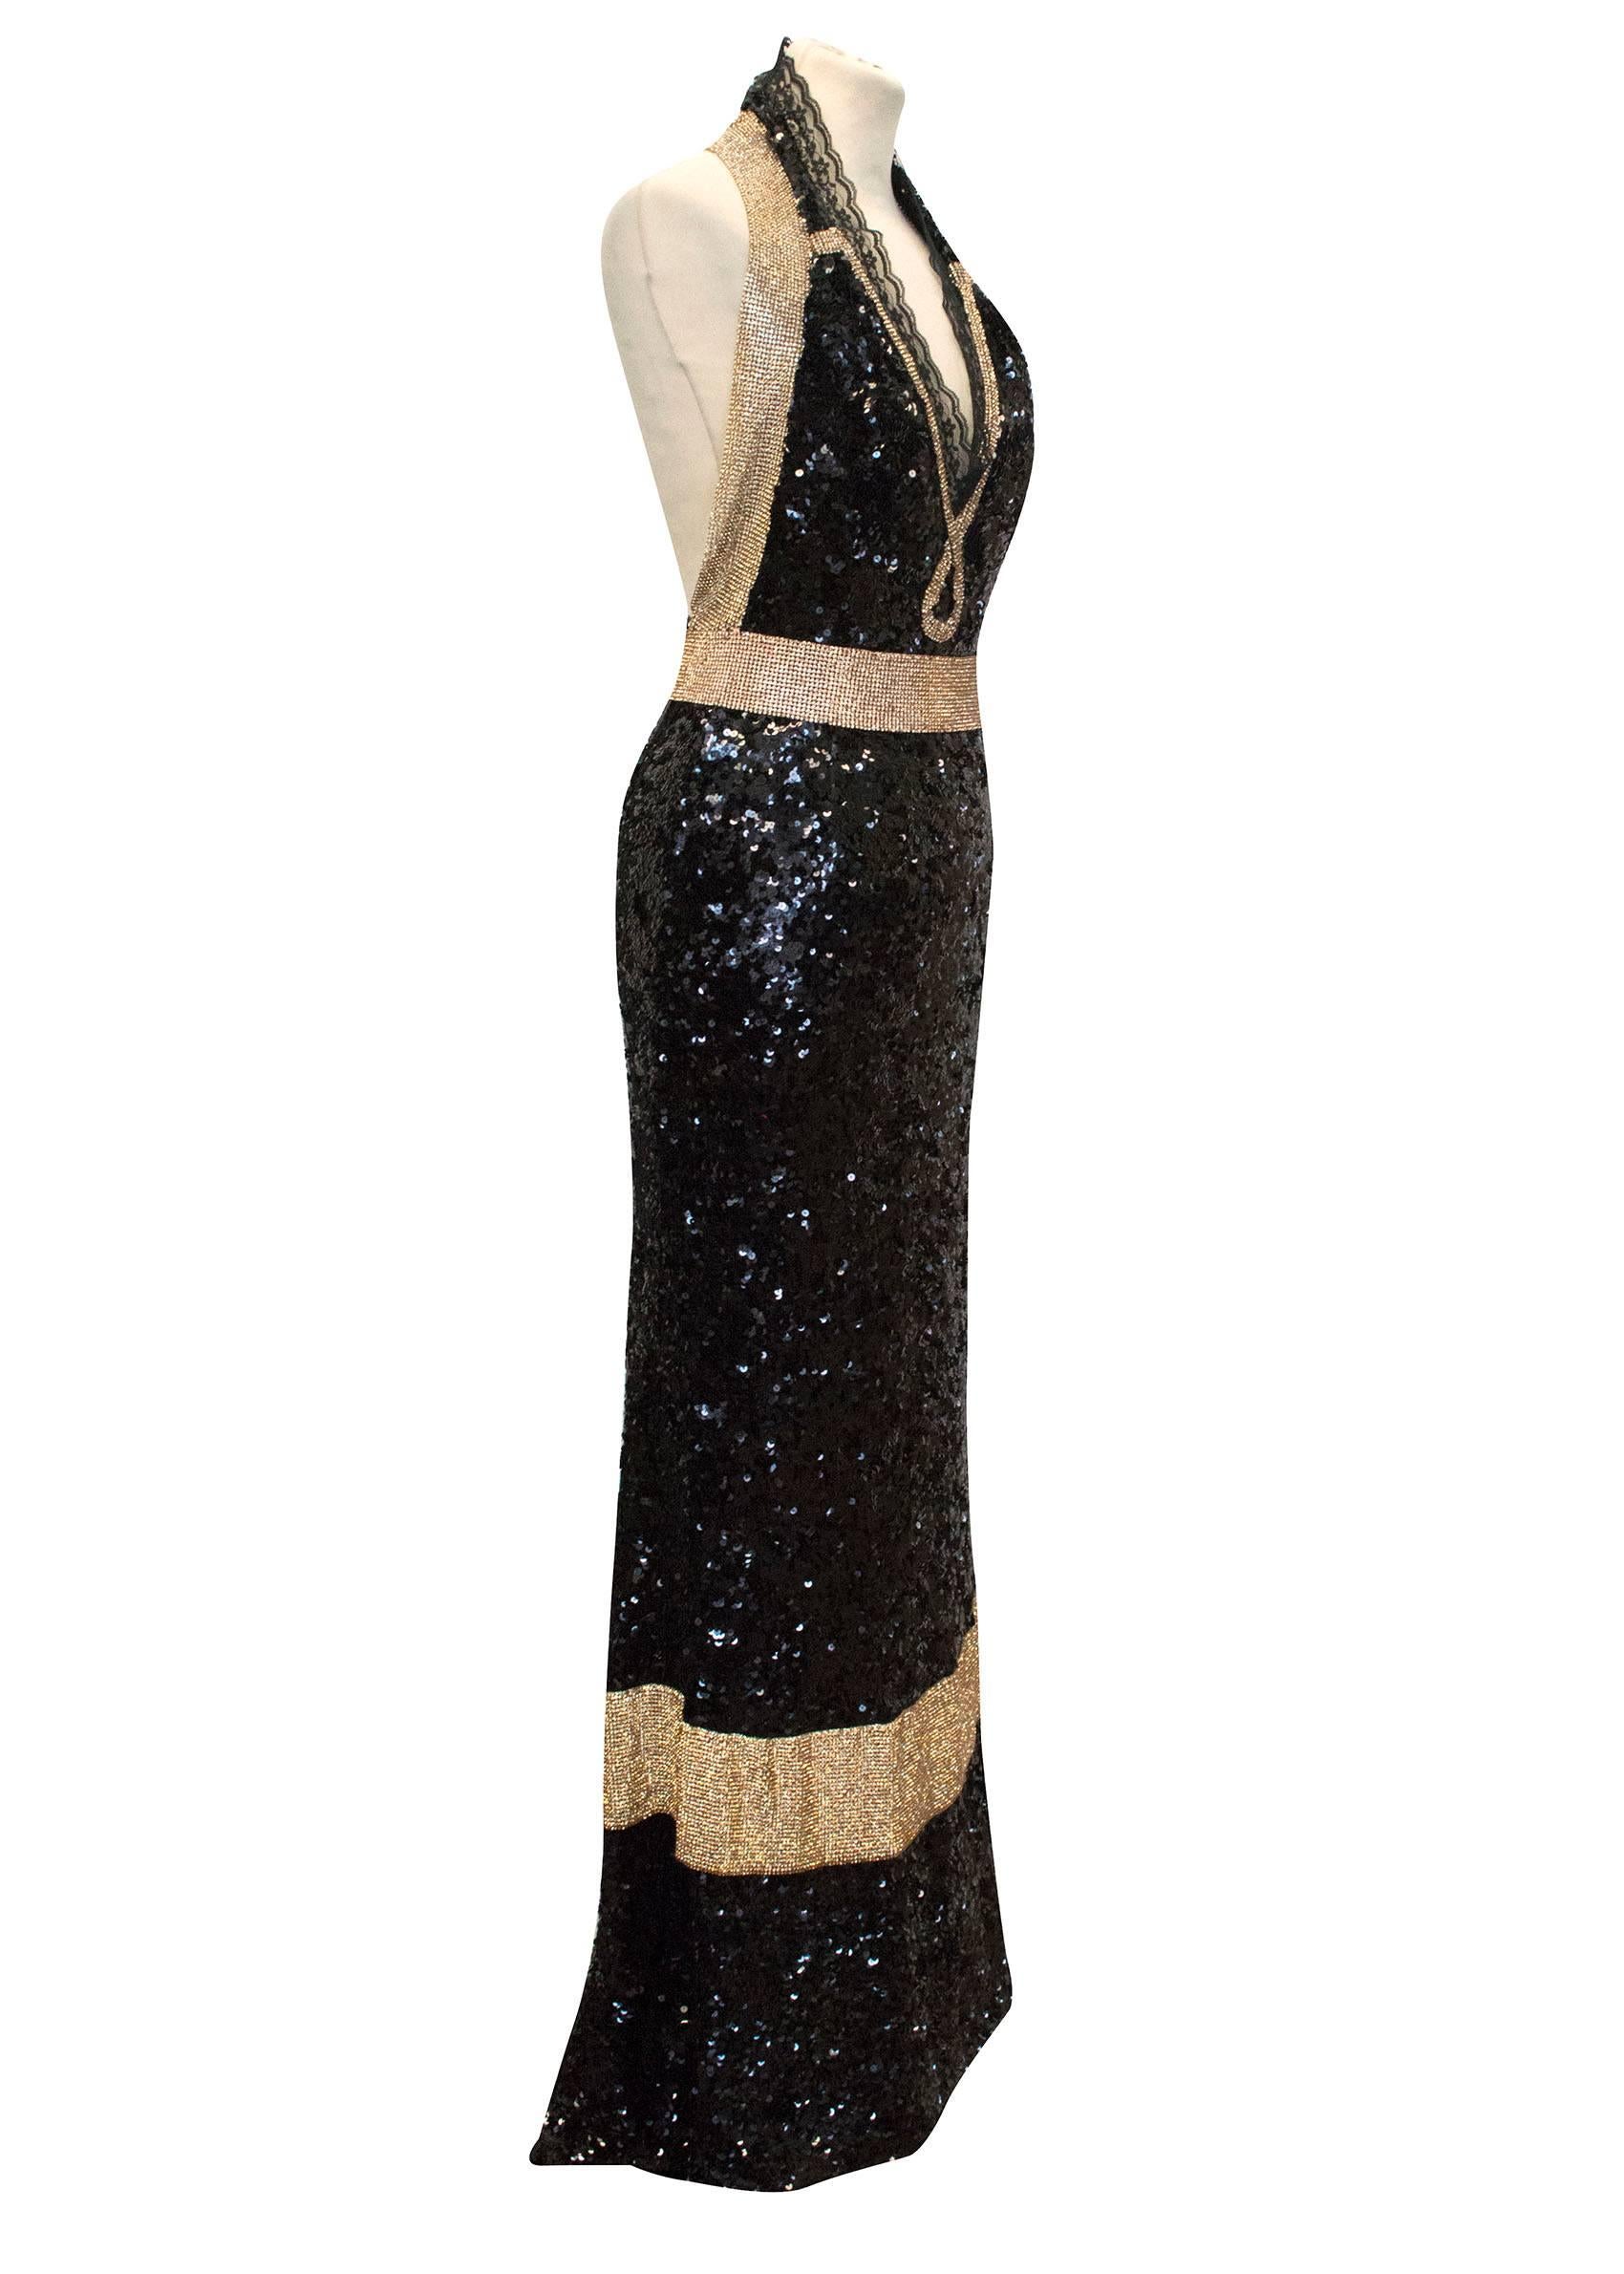 Dolce & Gabbana Bespoke Black and Gold Halter Neck Evening Gown is designed in a halter neck style with black sequins and 5cm thick gold crystal bands along the halter neck strap to the back, along the centre front bust, around the waistline and